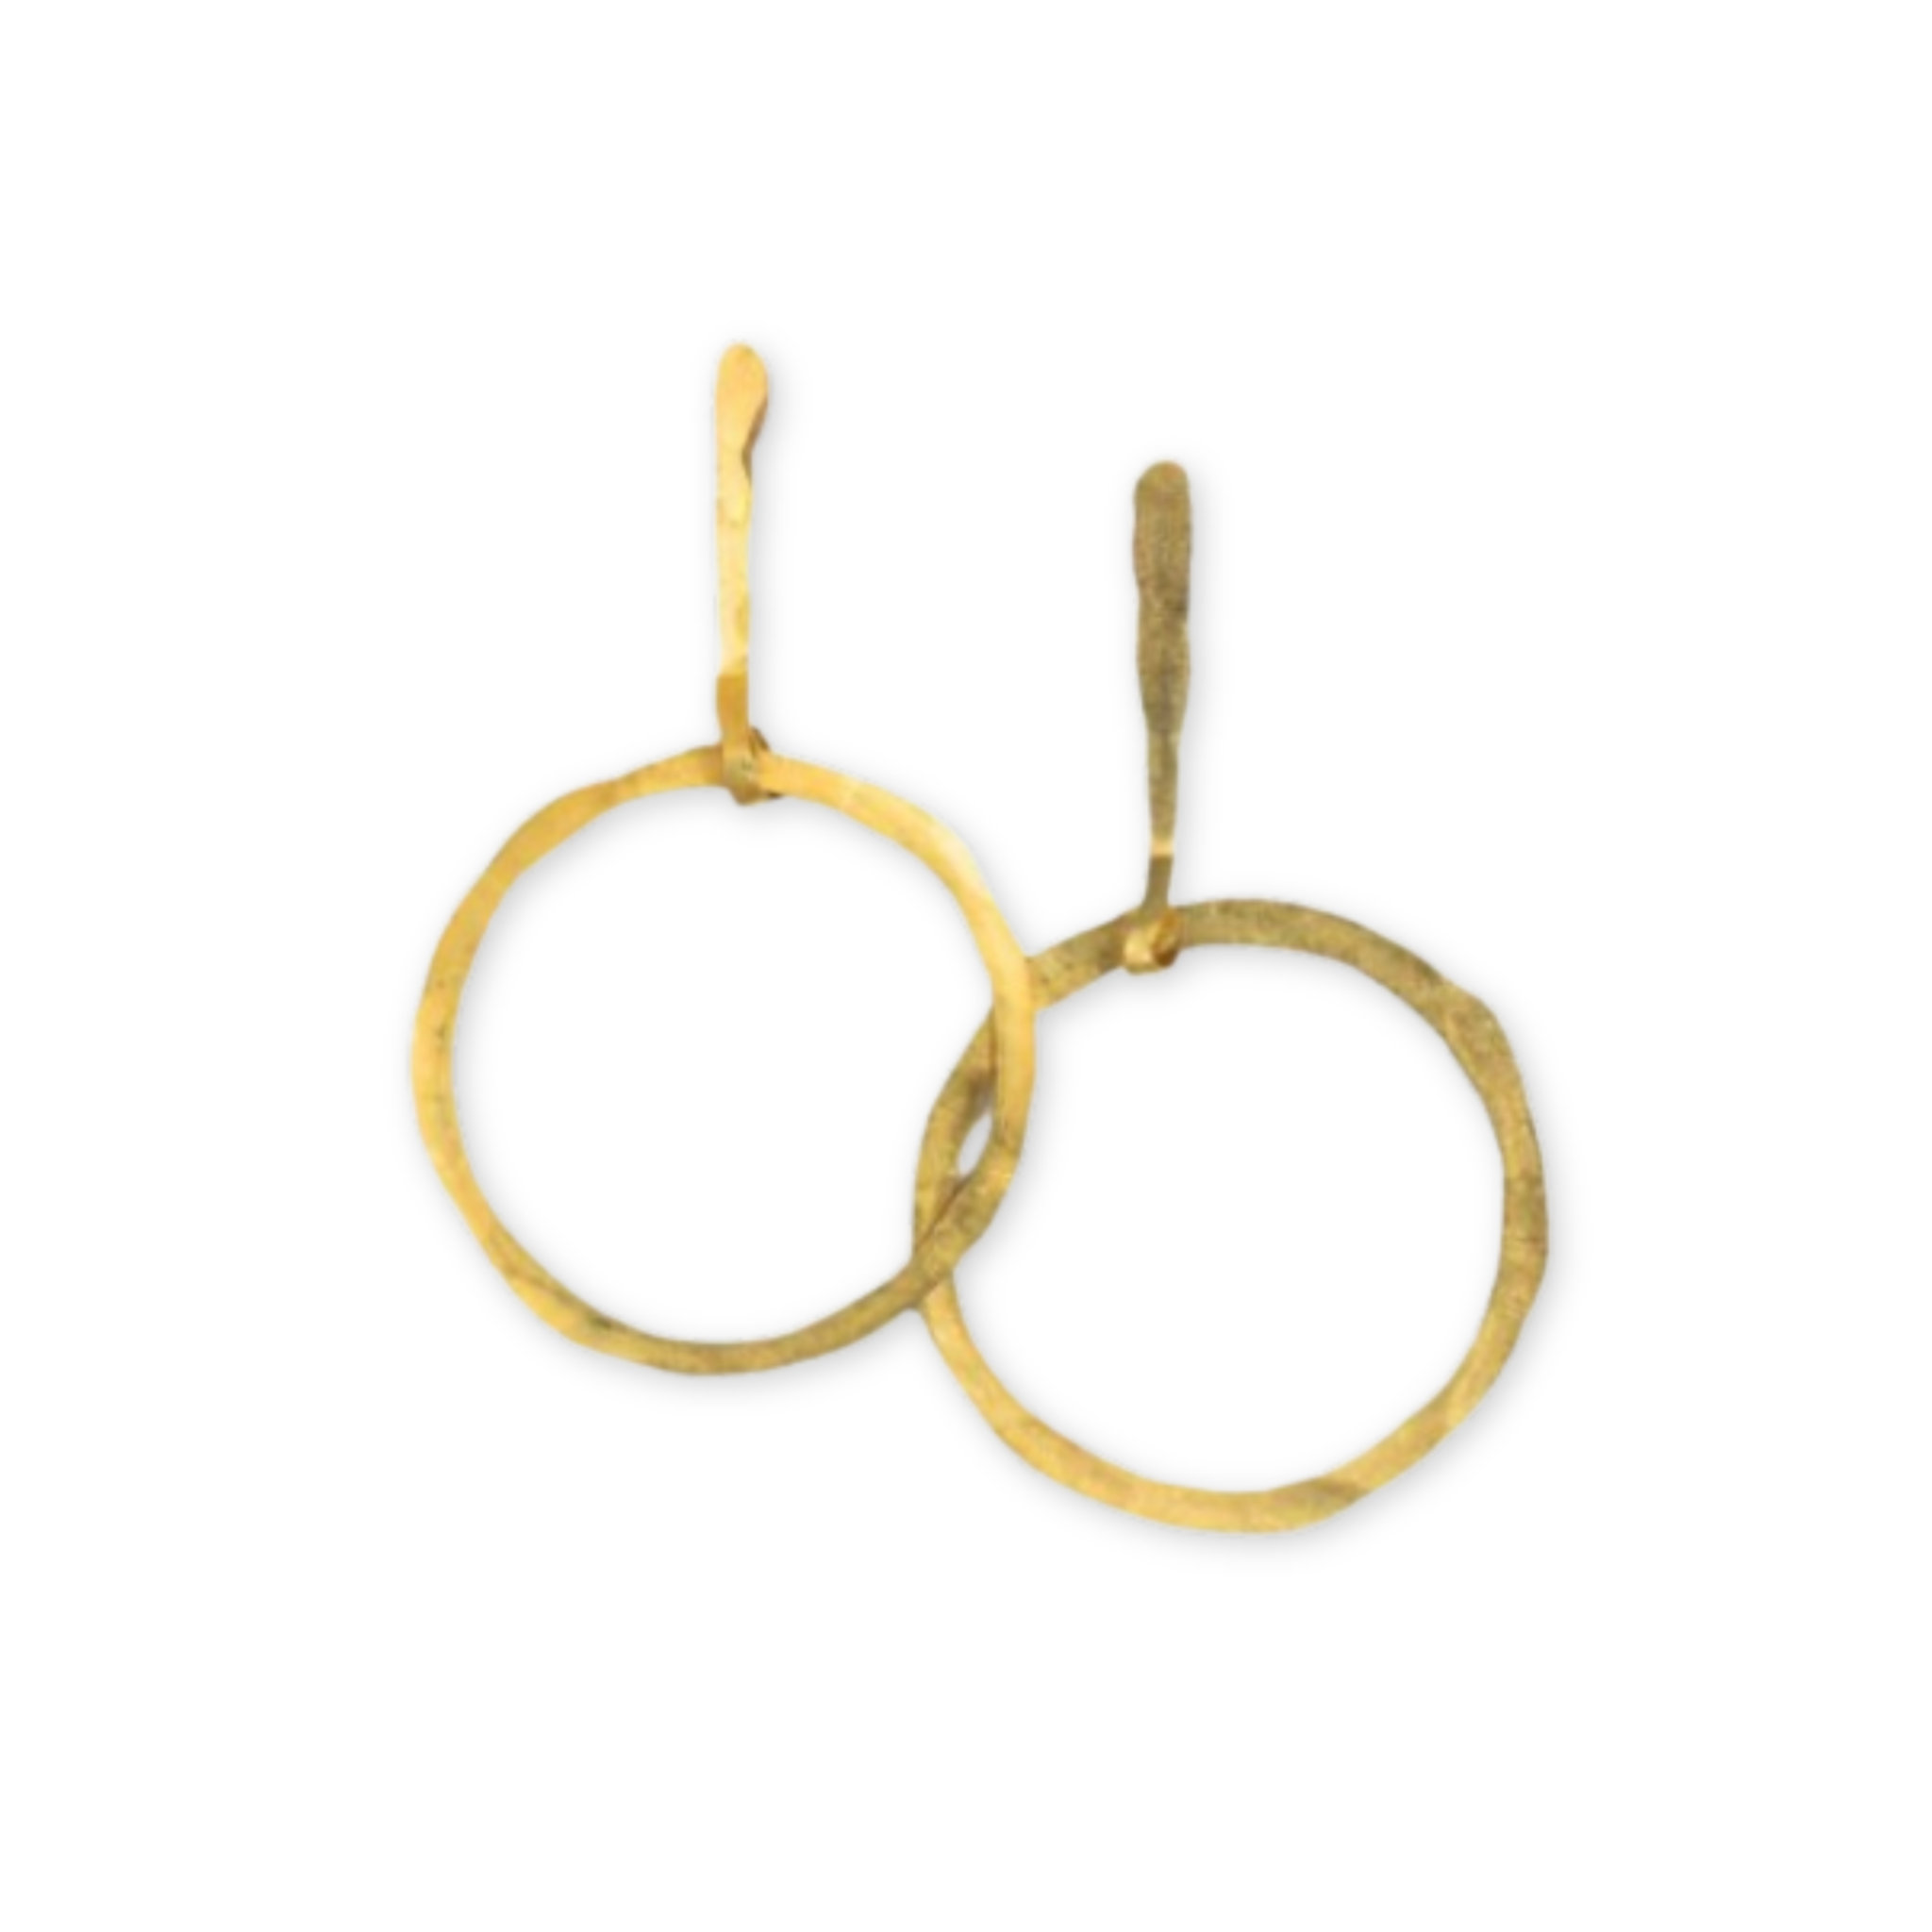 hammered post earrings with a textured circles hanging from a thin stick